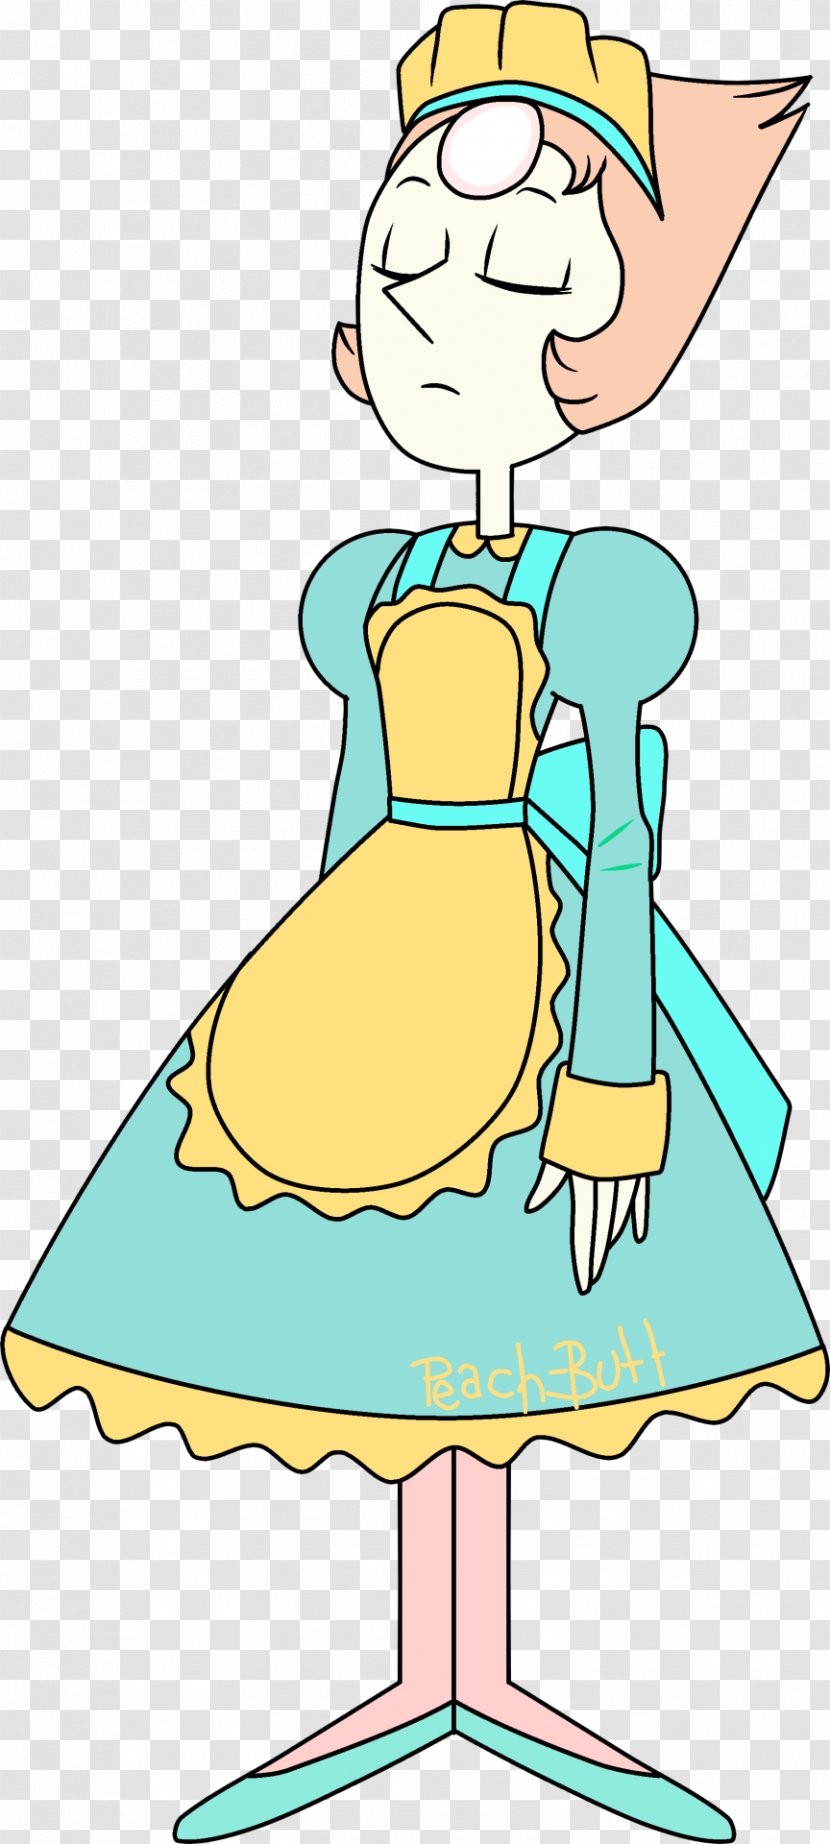 Pearl Steven Universe Clothing Character - Usain Bolt Transparent PNG